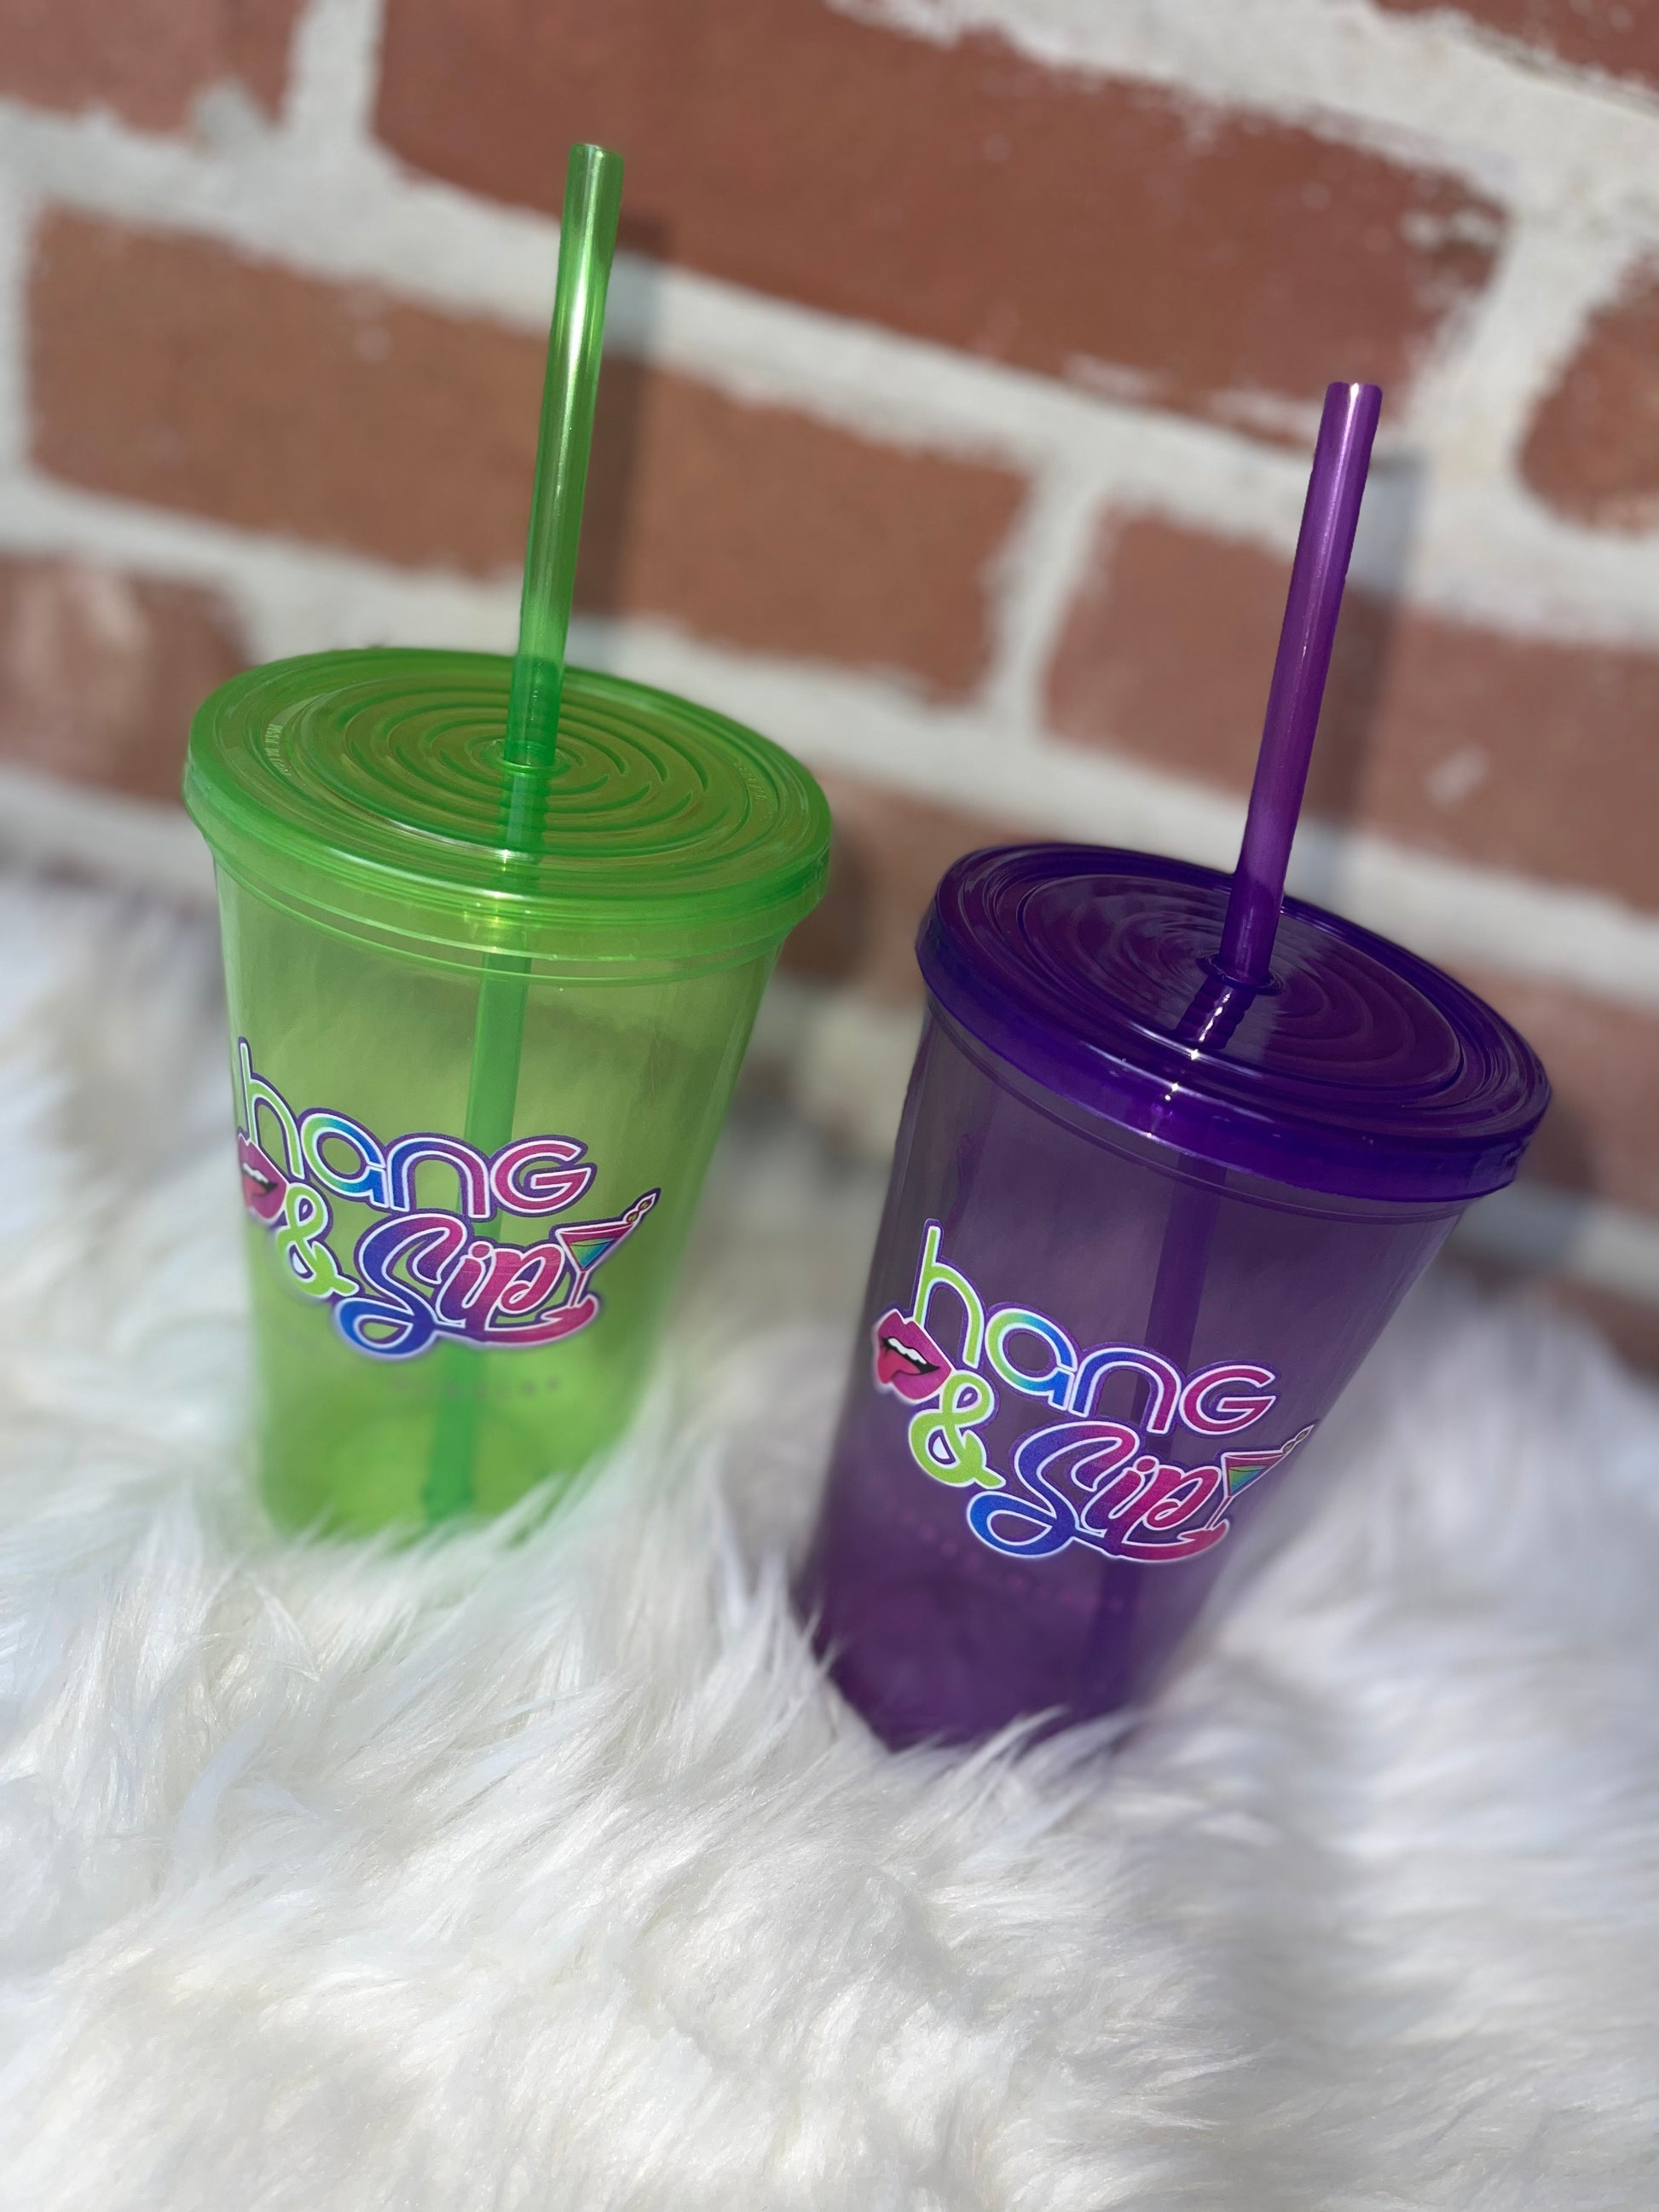 Make Your Own Sippy Cup to Help Teach Straw Drinking